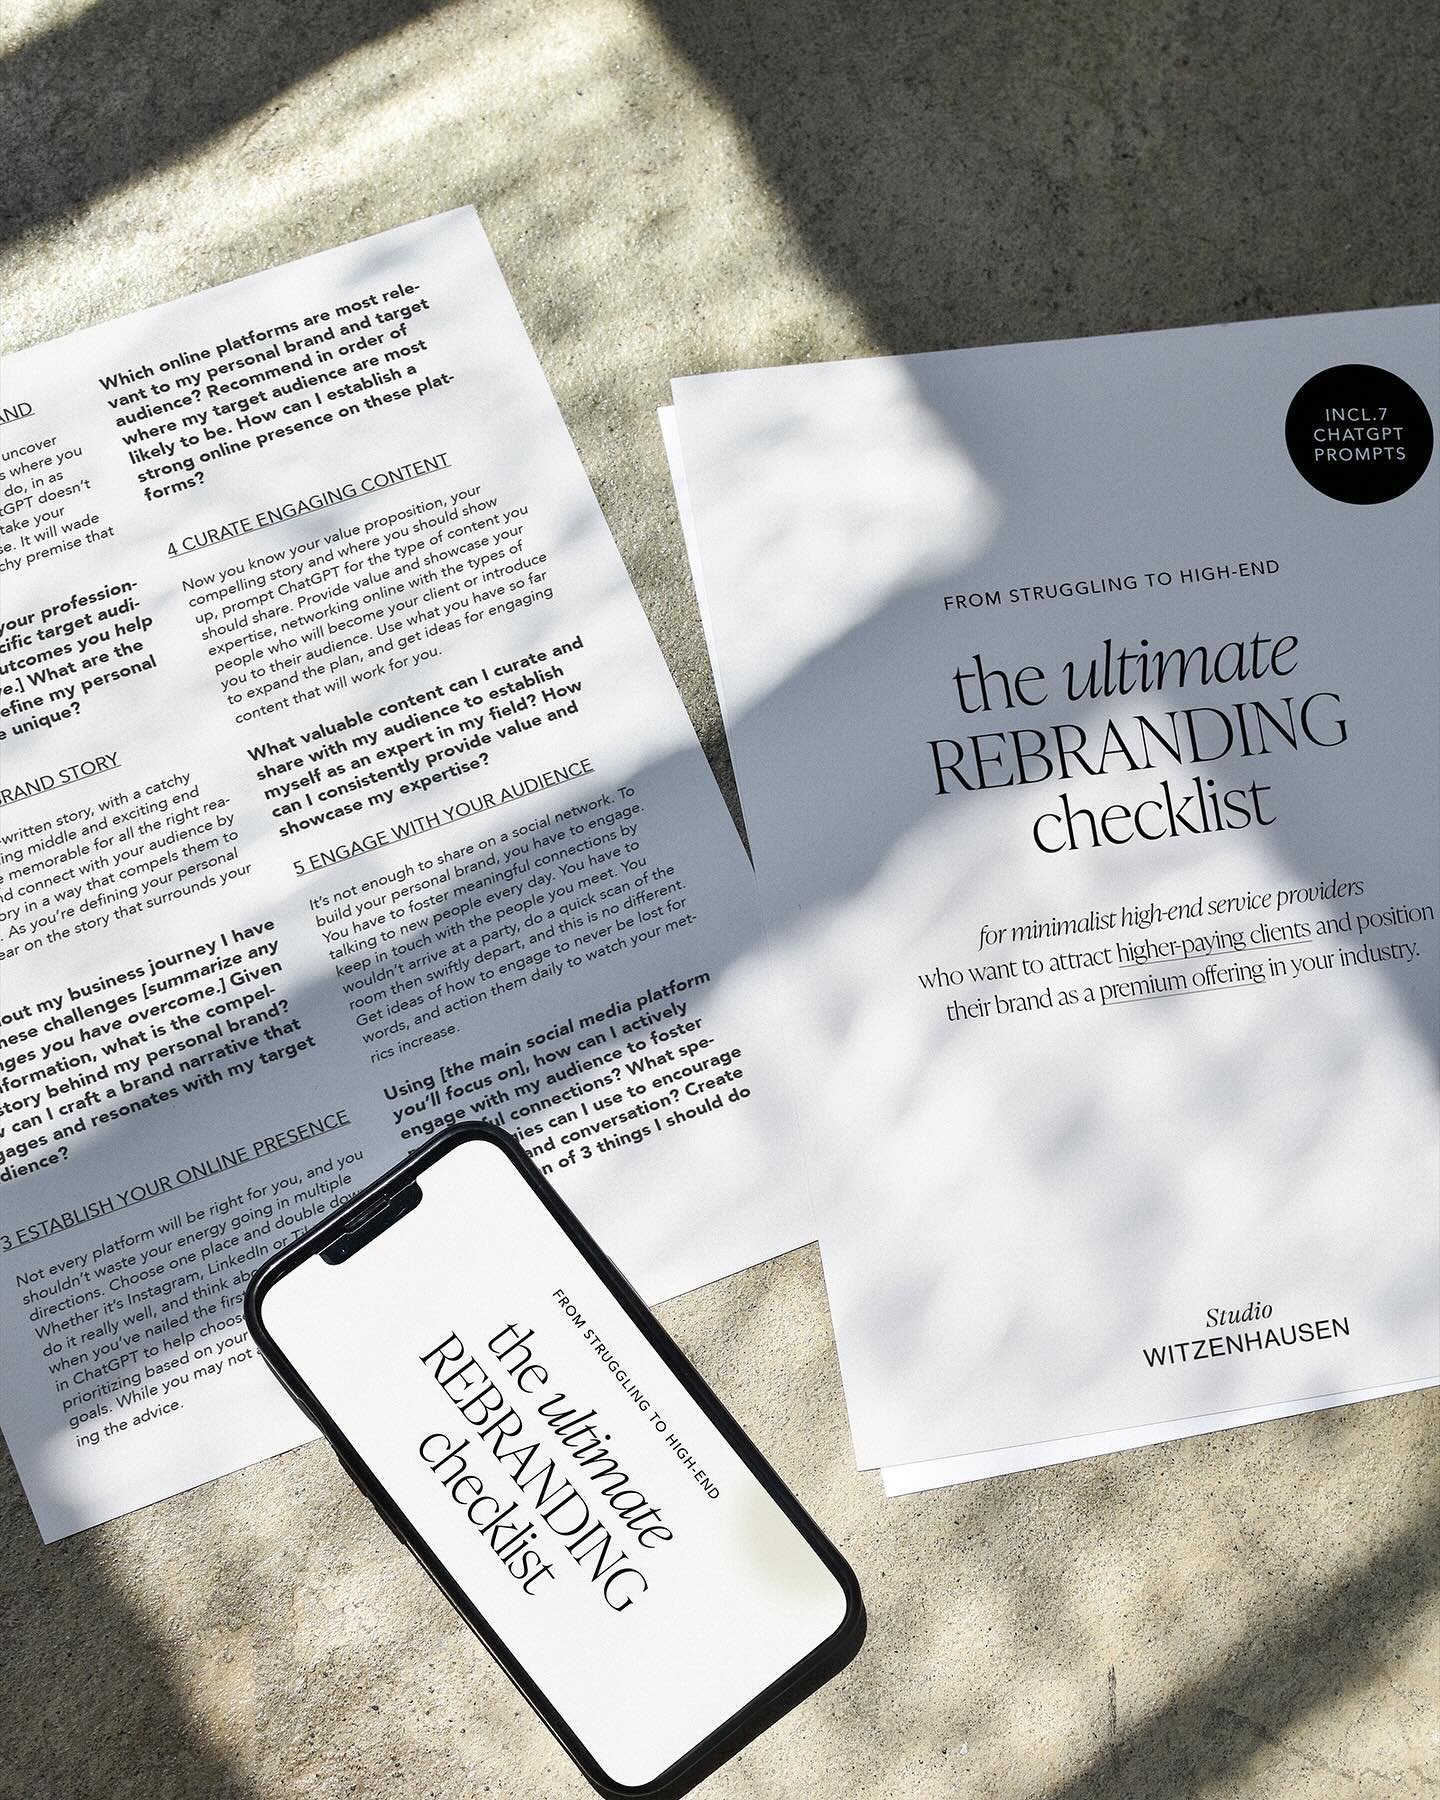 Hope you all had a lovely weekend! I&rsquo;ve crafted a freebie tailored for minimalist service providers looking to elevate their brand to high-end status. It includes seven ChatGPT prompts designed to assist you in this transformation. Feel free to